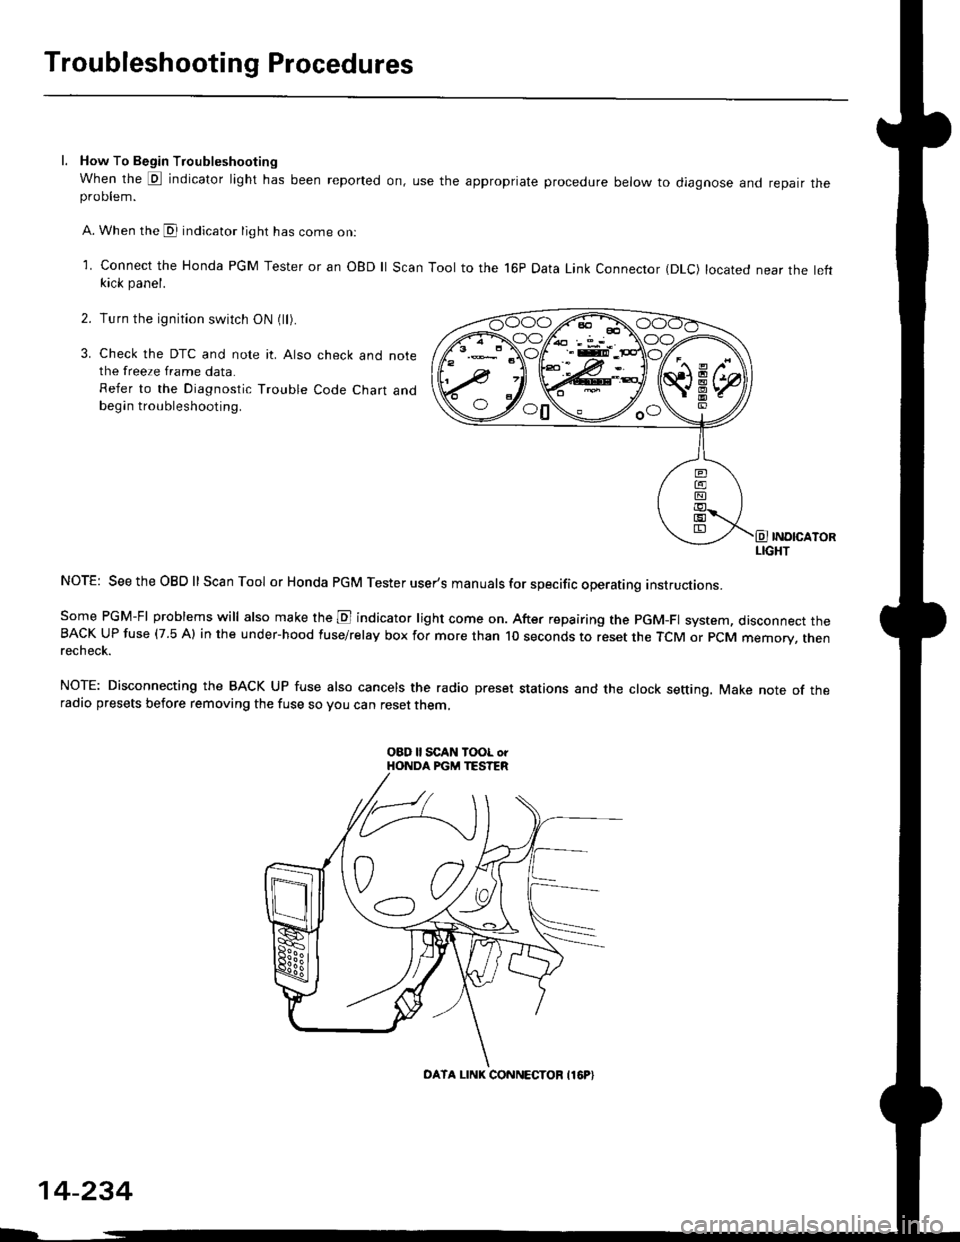 HONDA CIVIC 2000 6.G Owners Guide Troubleshooting Procedures
l. How To Begin Troubleshooting
When the E indicator light has been reported on, use the appropriate procedure below to diagnose and repatr theproDlem.
A. When the @ indicat